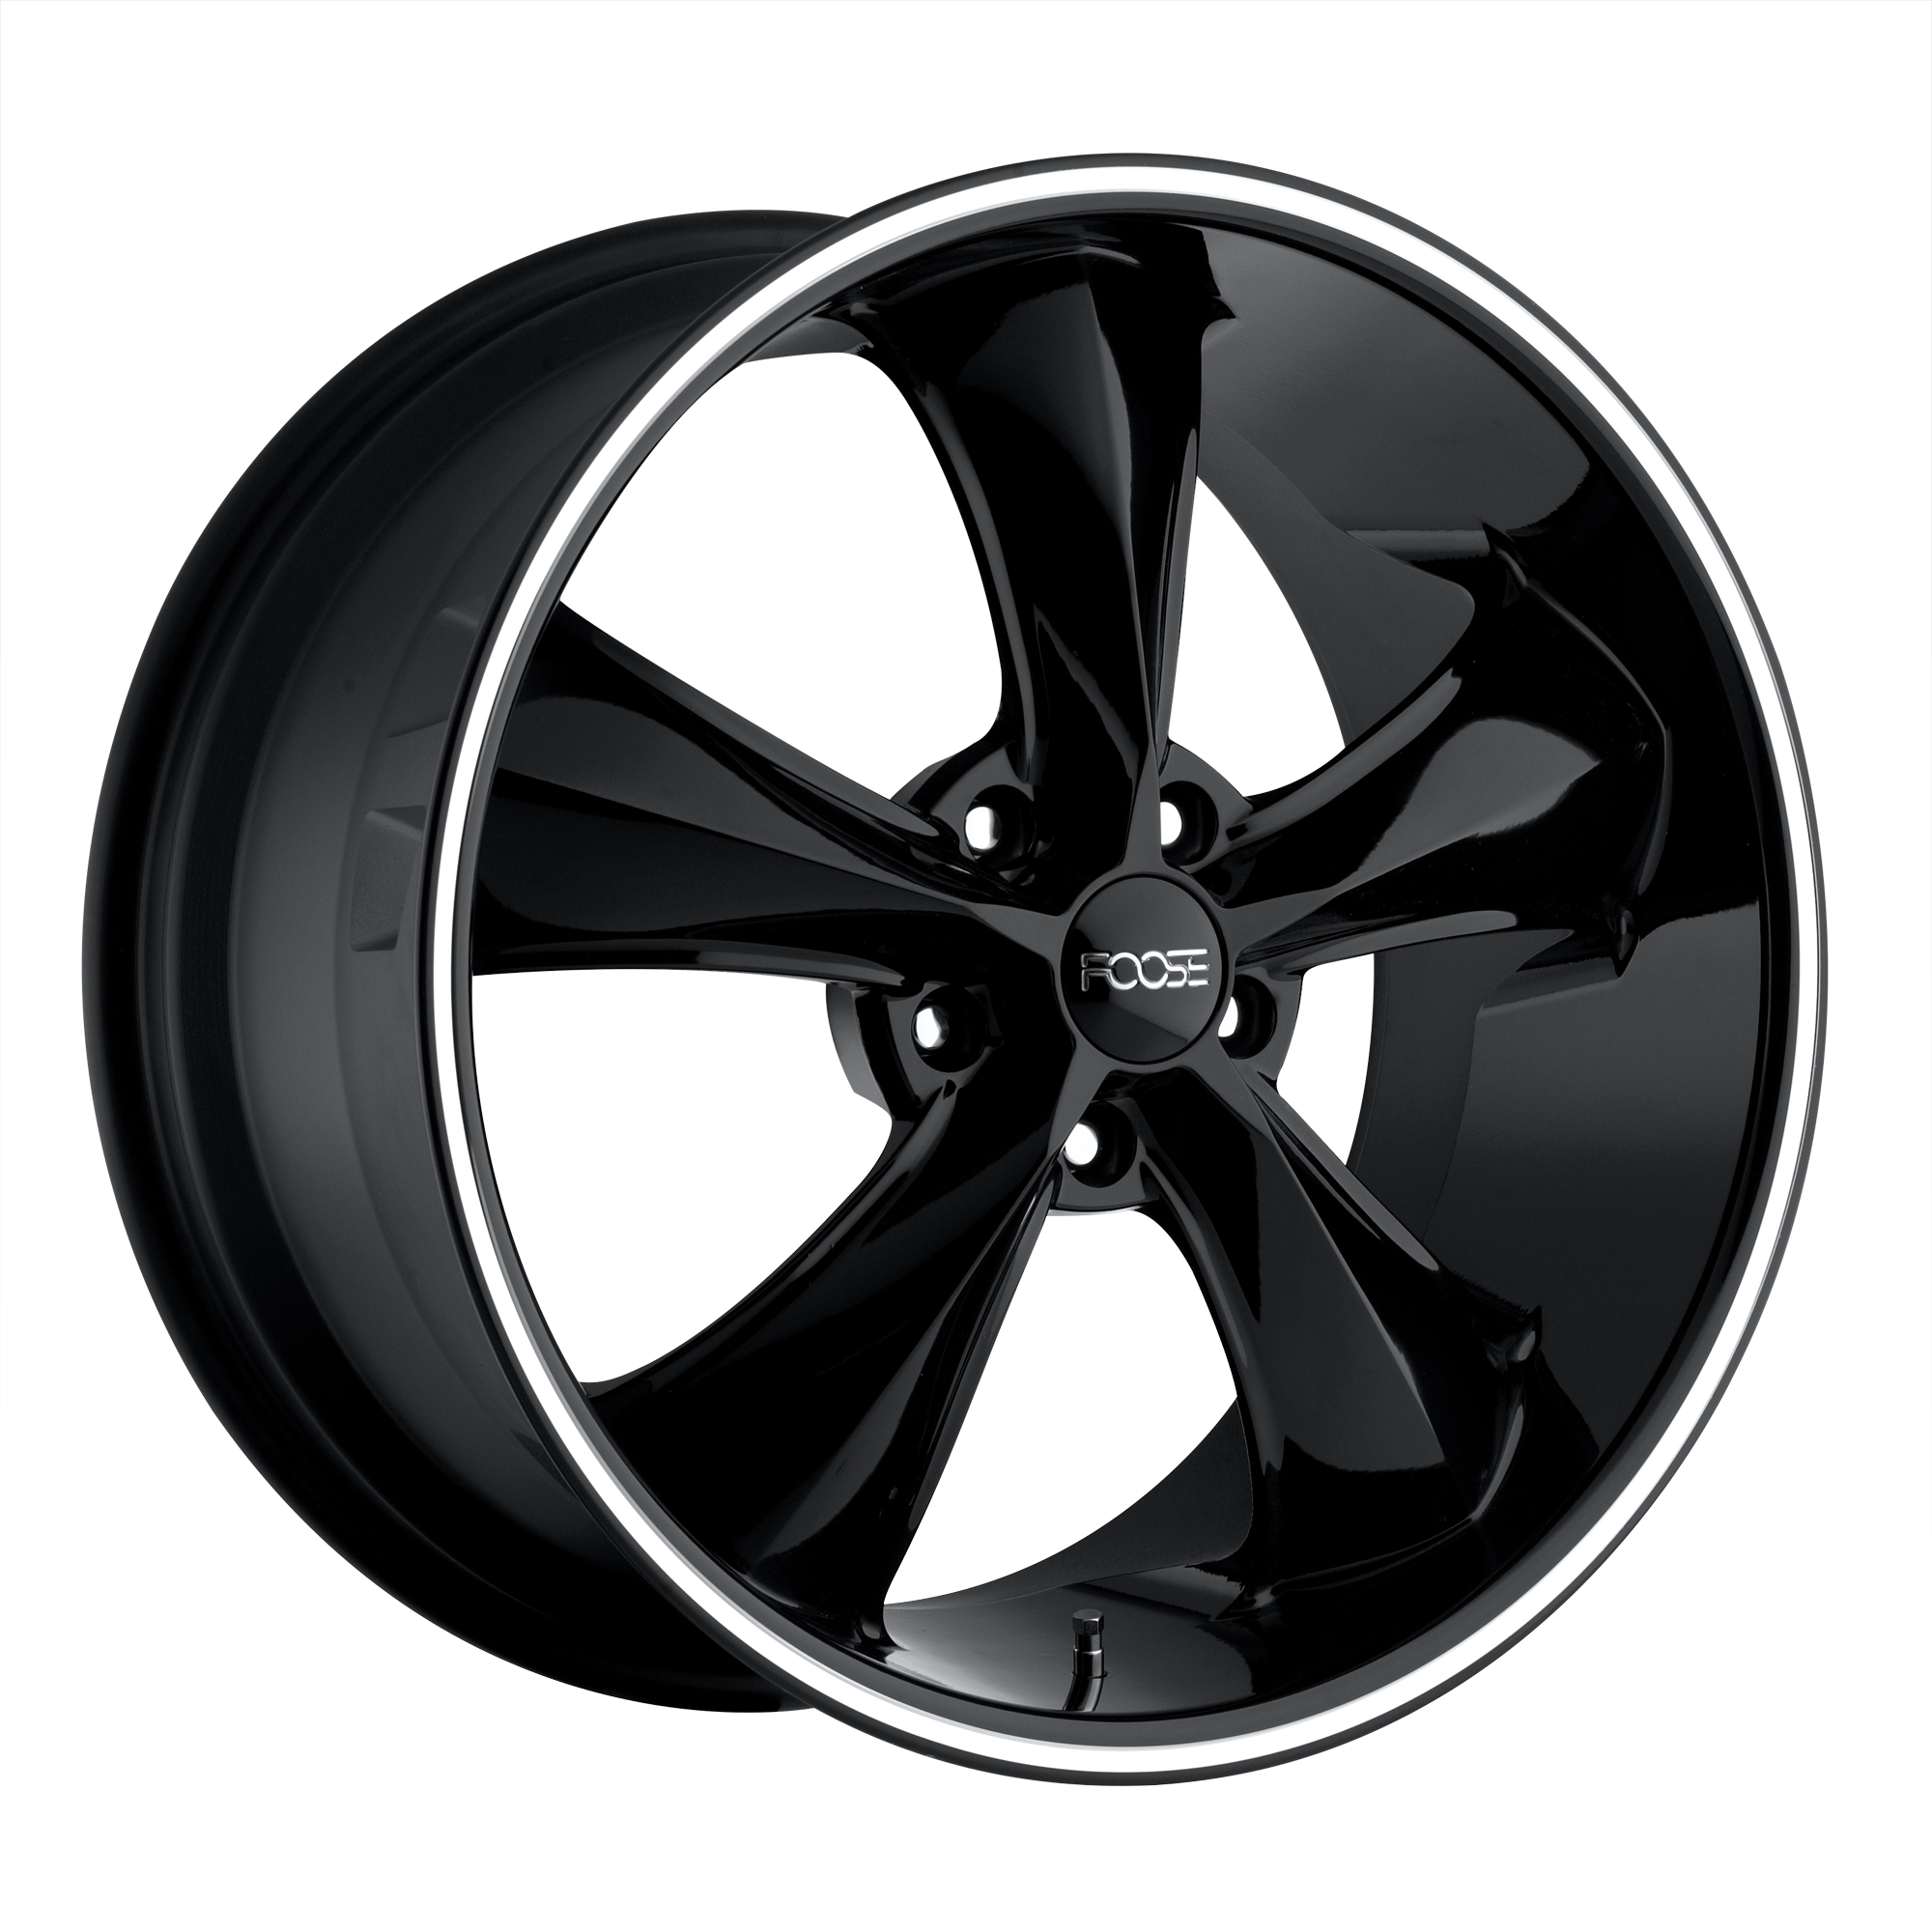 LEGEND 18x8.5 5x114.30 GLOSS BLACK MILLED (34 mm) - Tires and Engine Performance